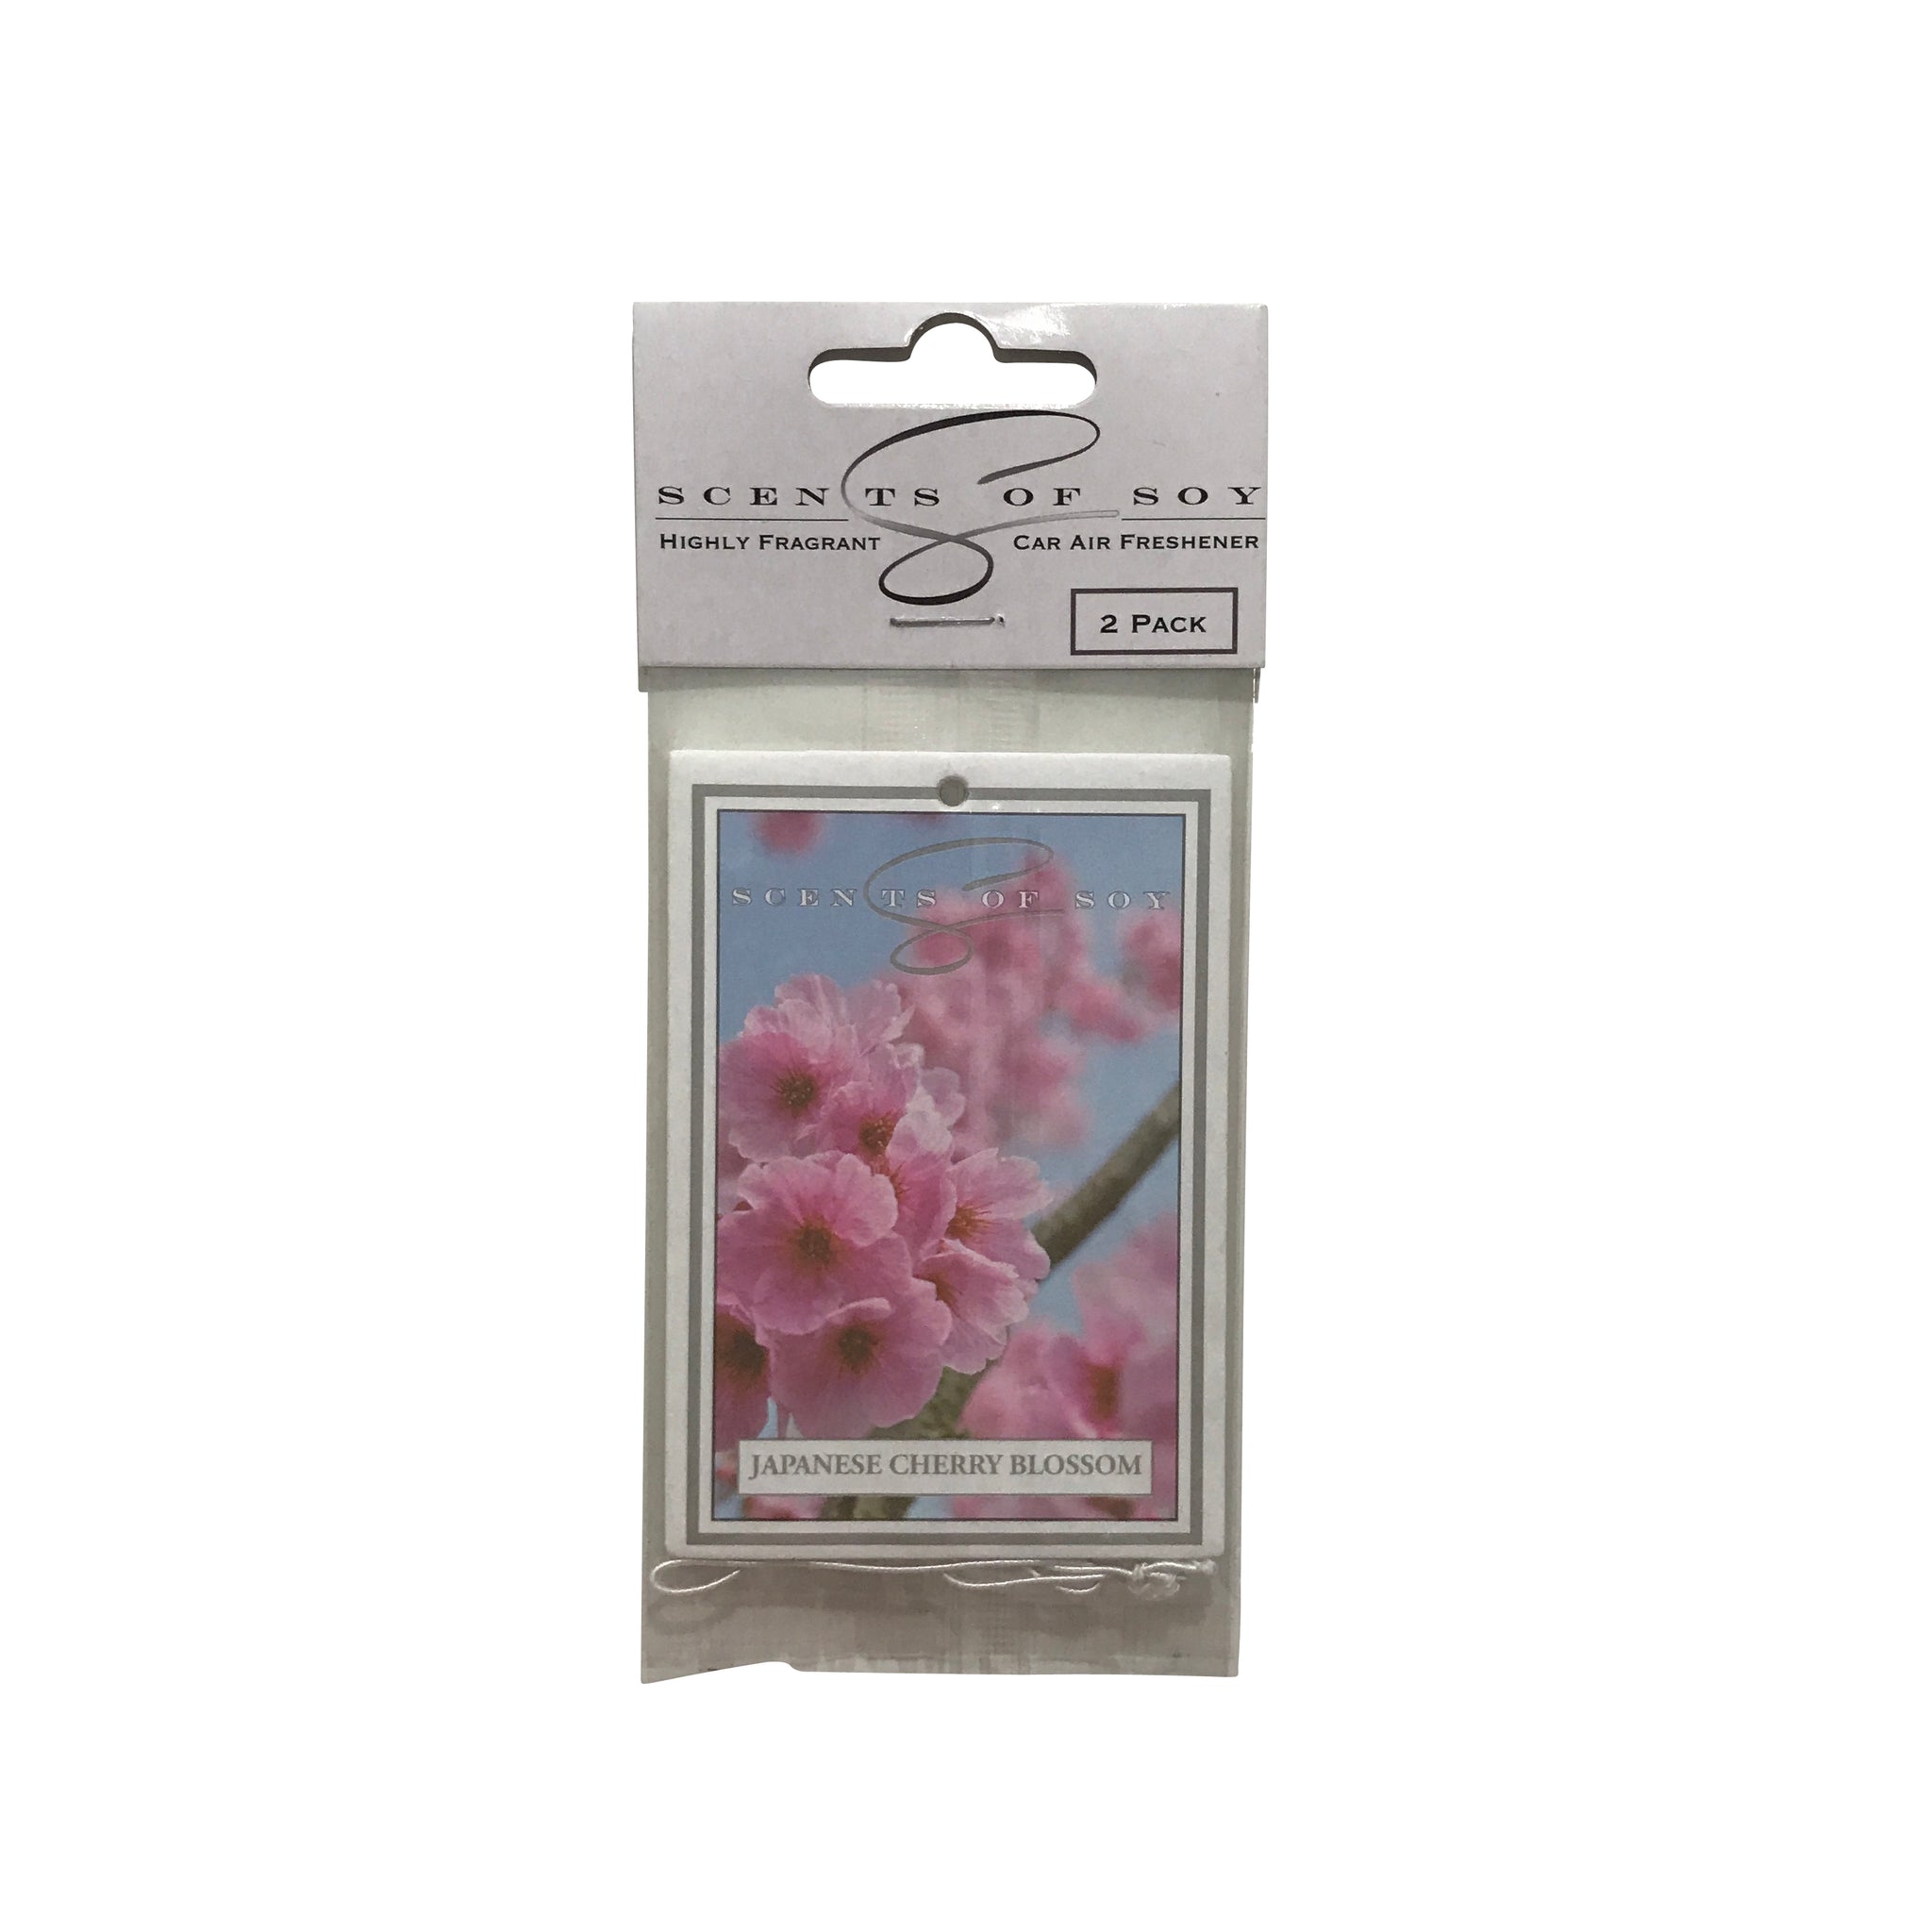 Japanese Cherry Blossom 2 Pack Car Air Freshener – Scents of Soy